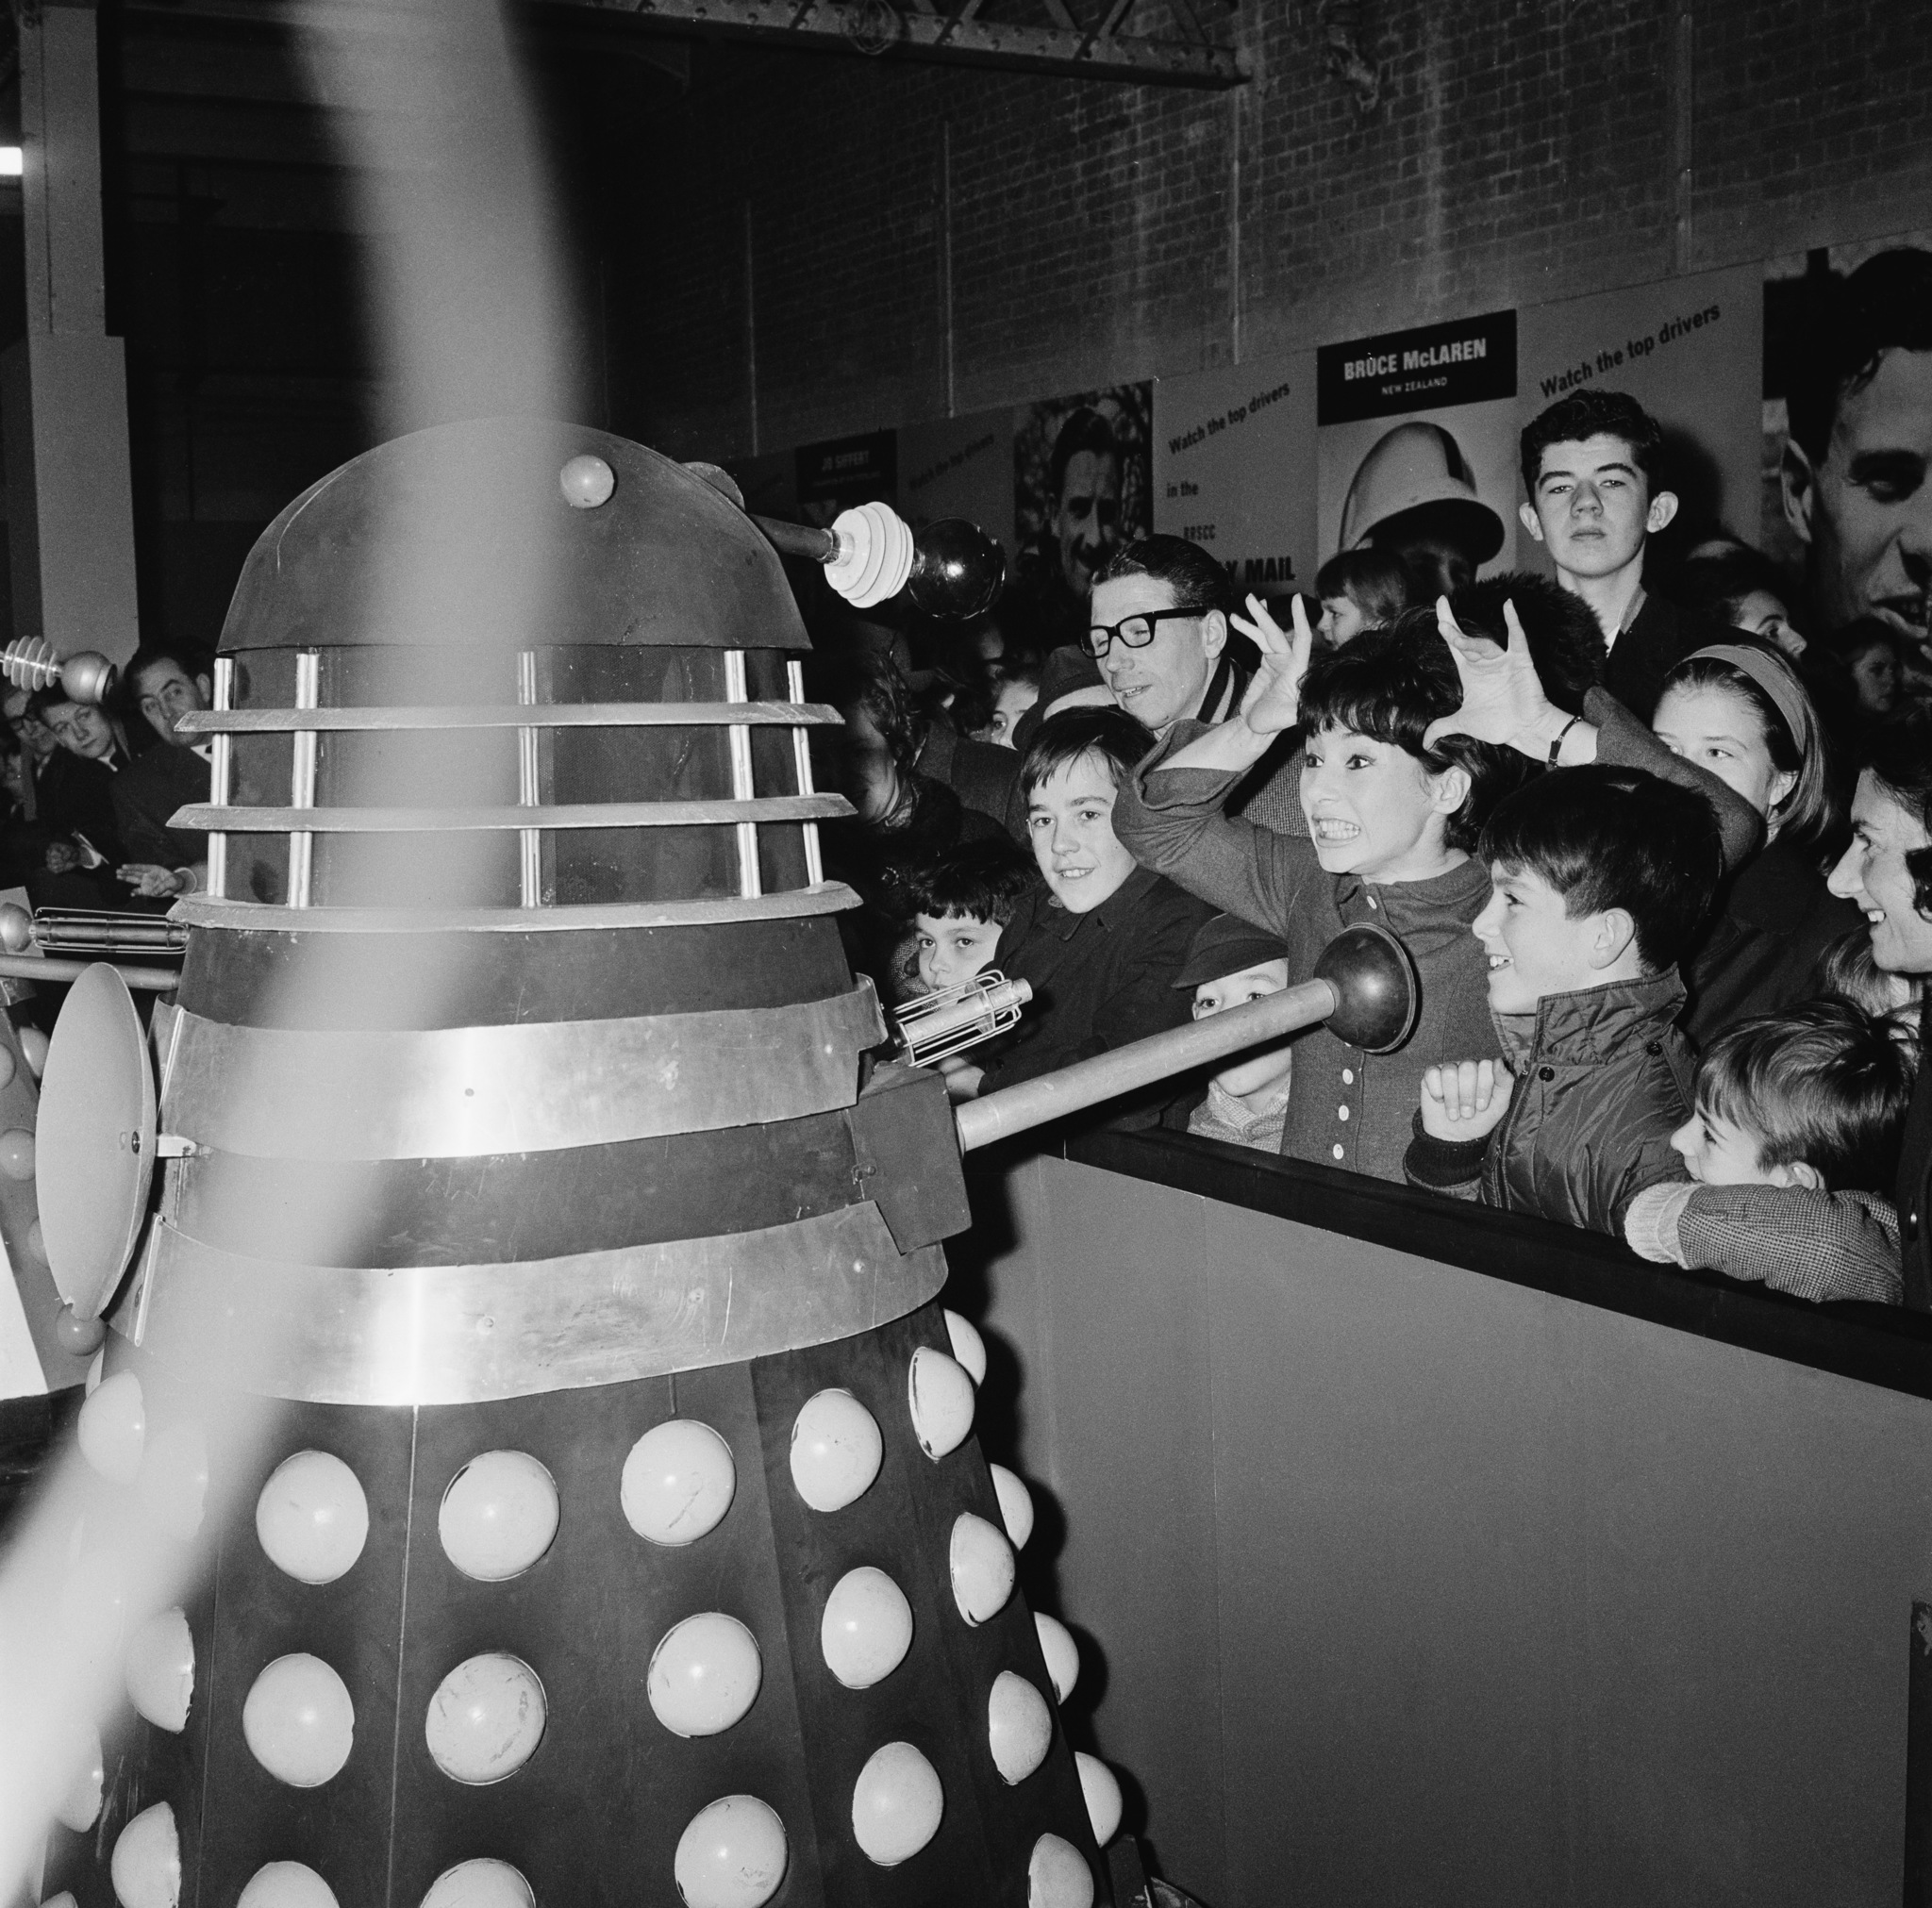 British actress Carole Ann Ford (centre, right) makes a horn sign at a Dalek from the BBC television science fiction series 'Doctor Who', at the Daily Mail Schoolboys' and Girls' Exhibition at Olympia, London, 28th December 1964. In the series, Ford plays Susan Foreman, the companion of the first Doctor, played by William Hartnell.